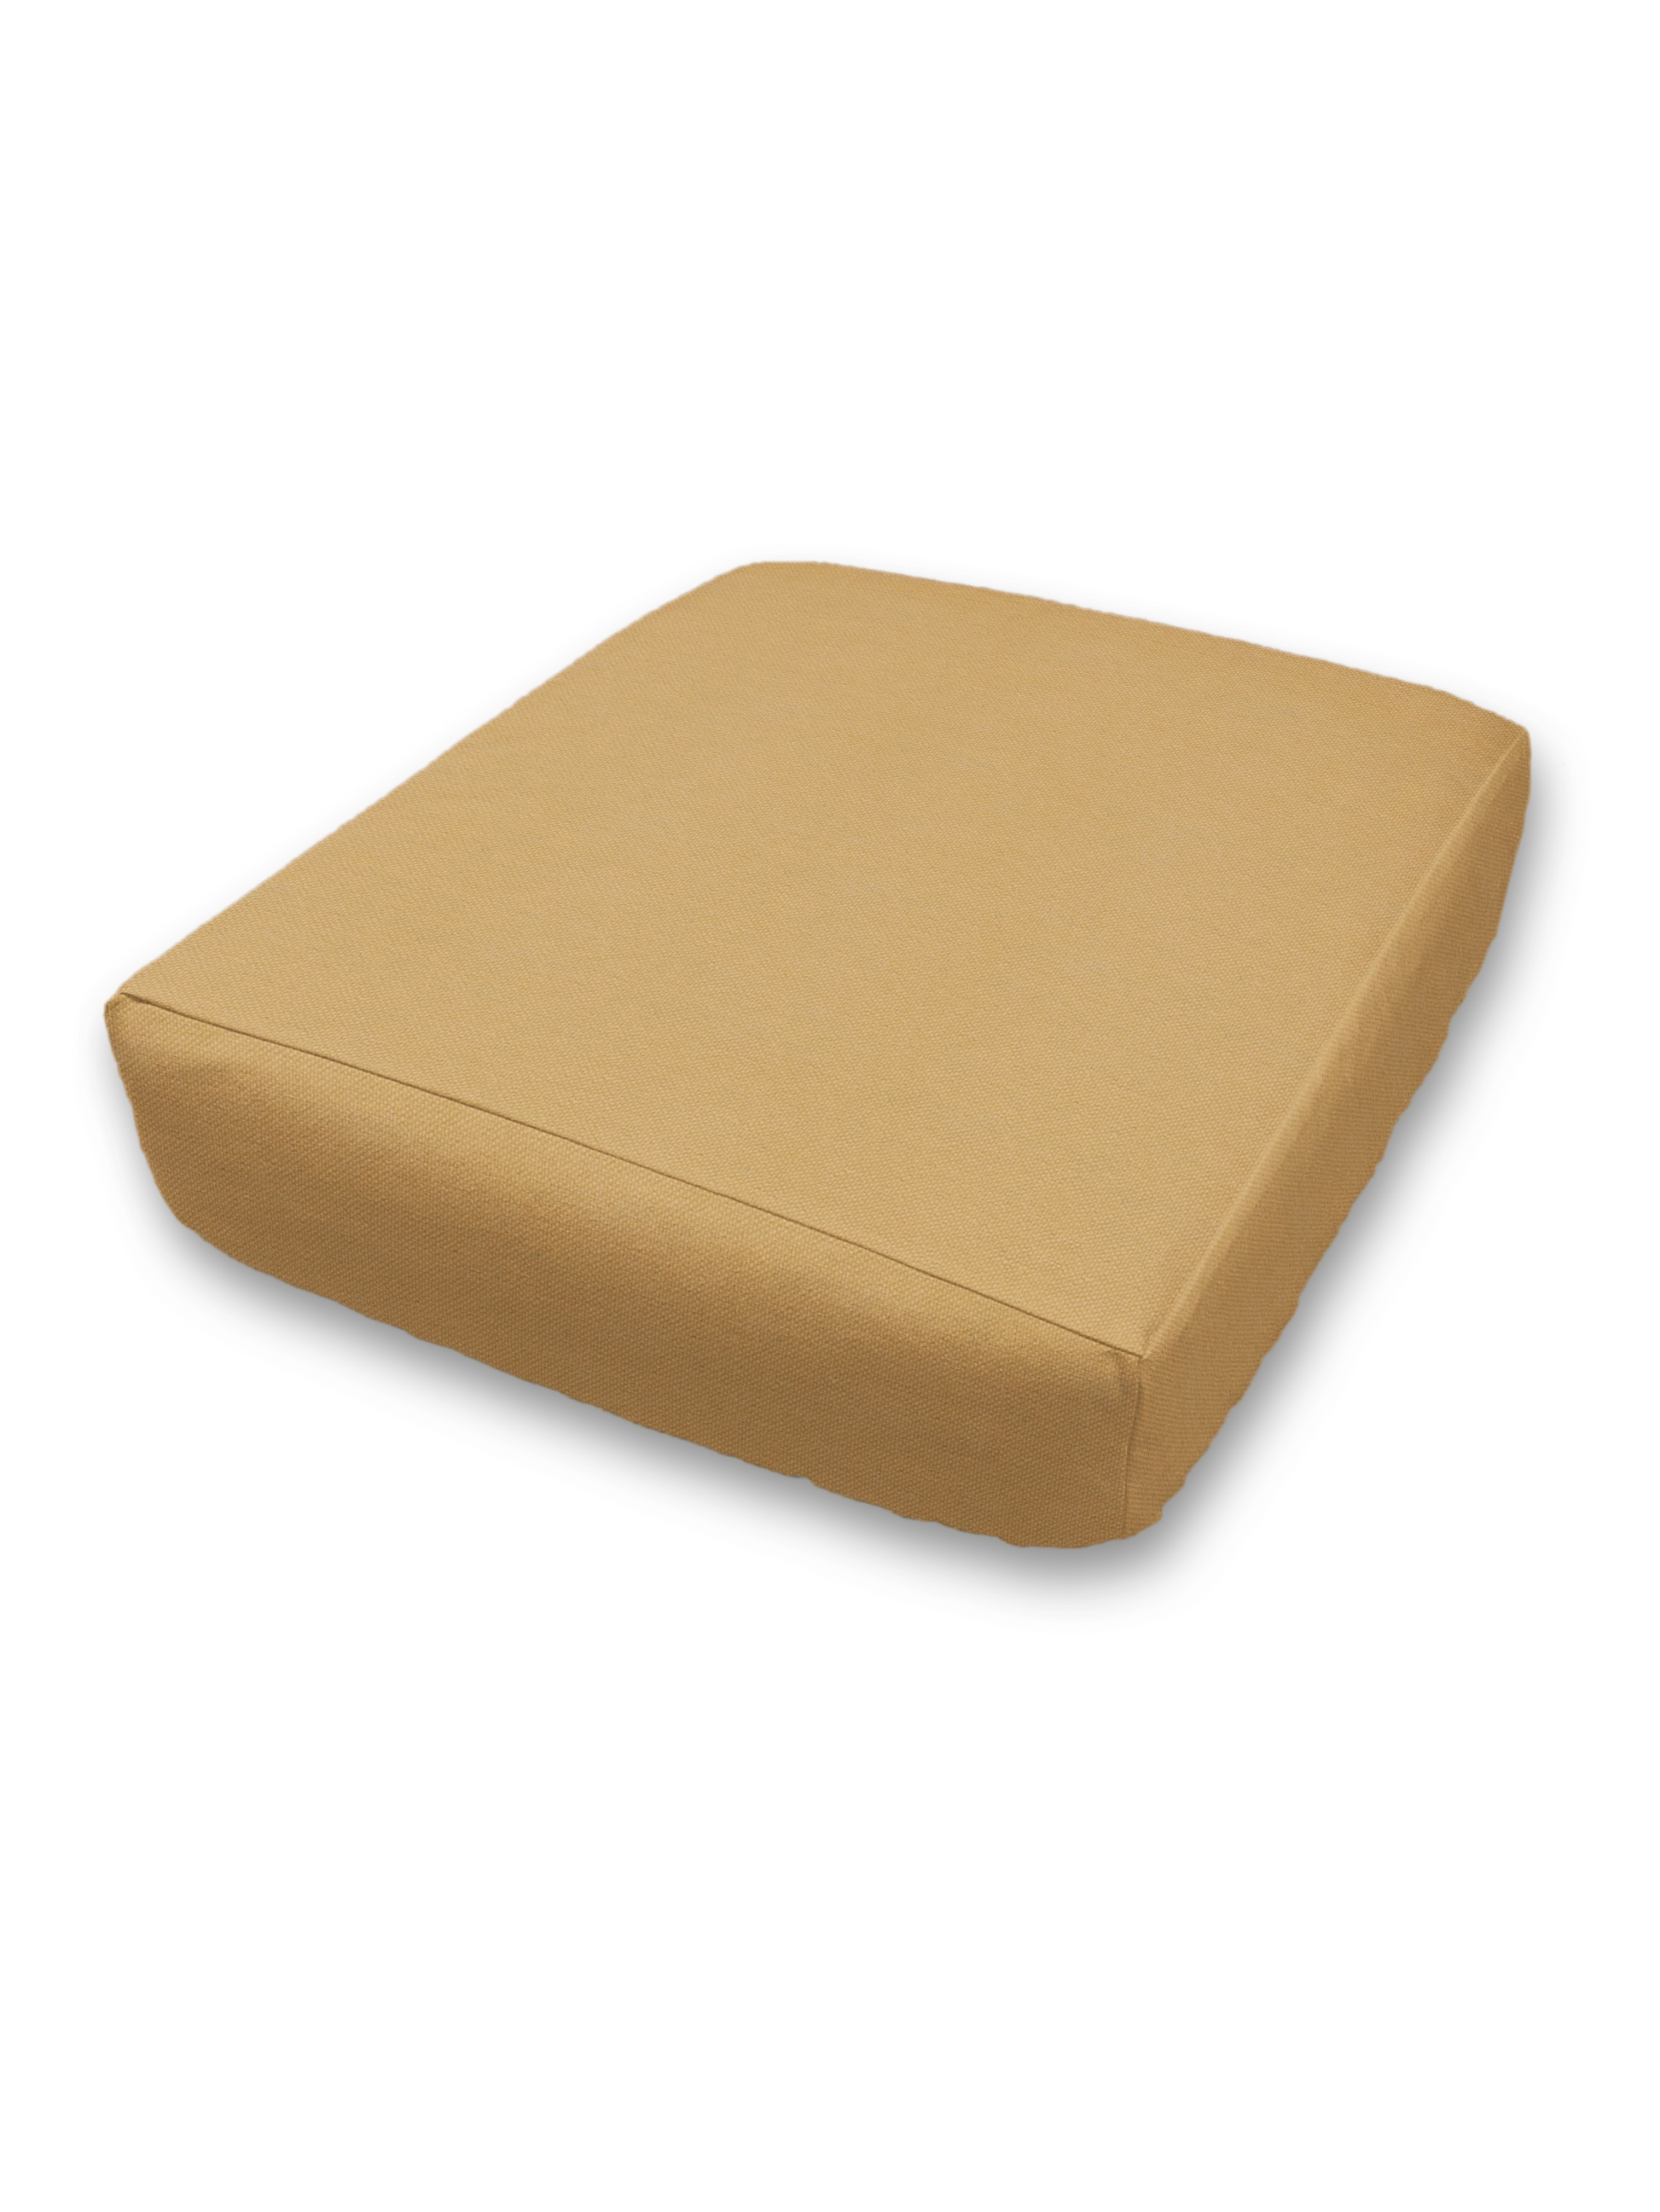 Custom Elastic Fitted & Protective Cushion Cover - Durable Duck Canvas - Choice of Solid Colors